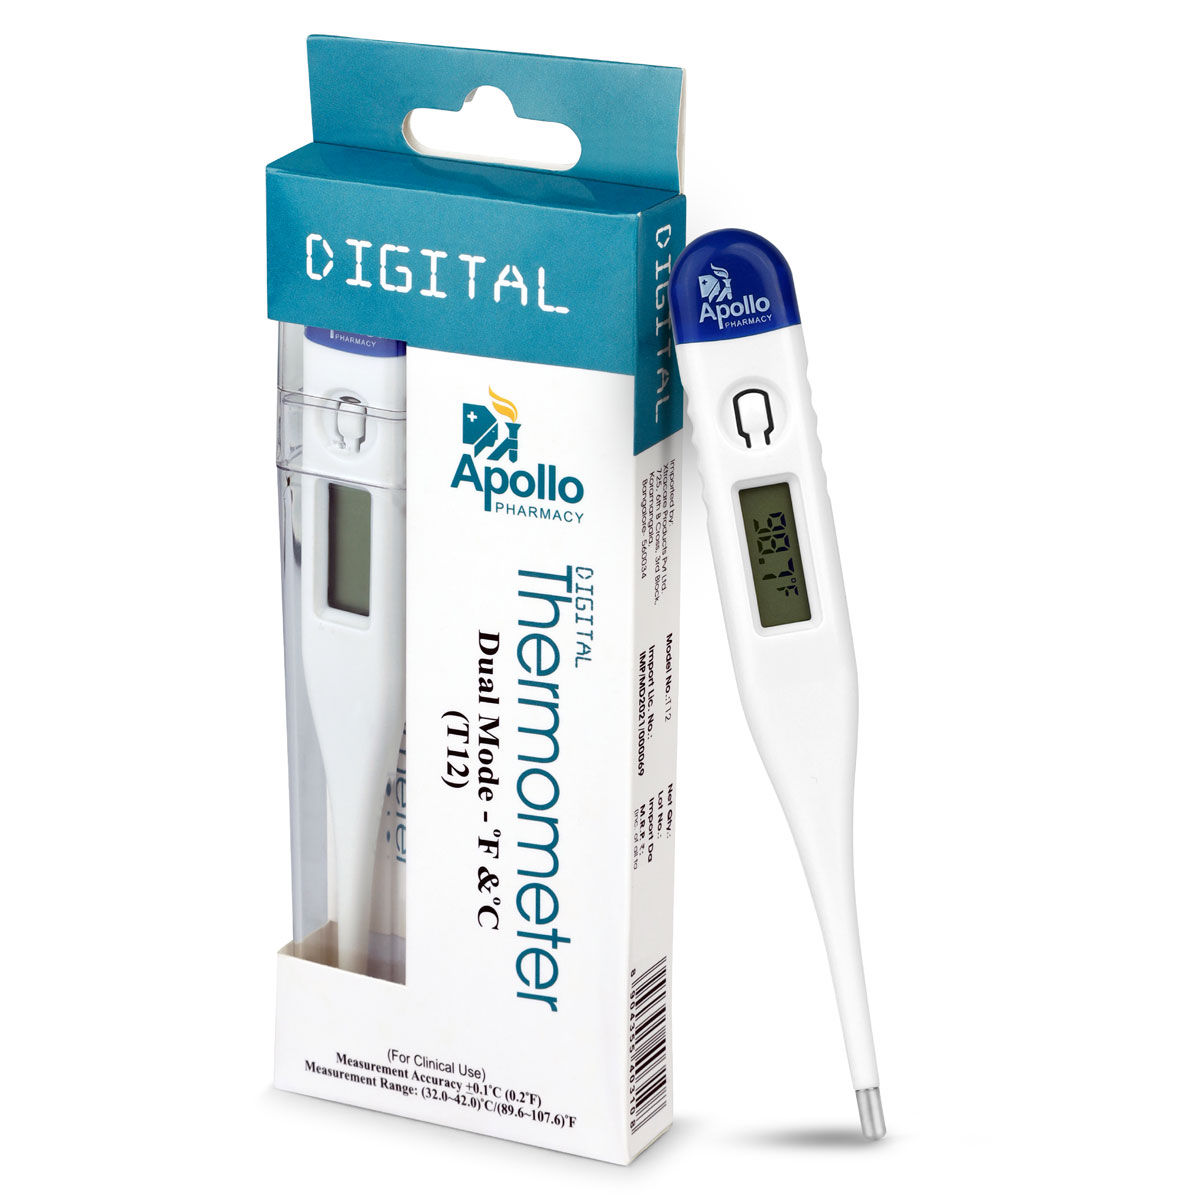 Buy Apollo Pharmacy Digital Thermometer, 1 Count Online